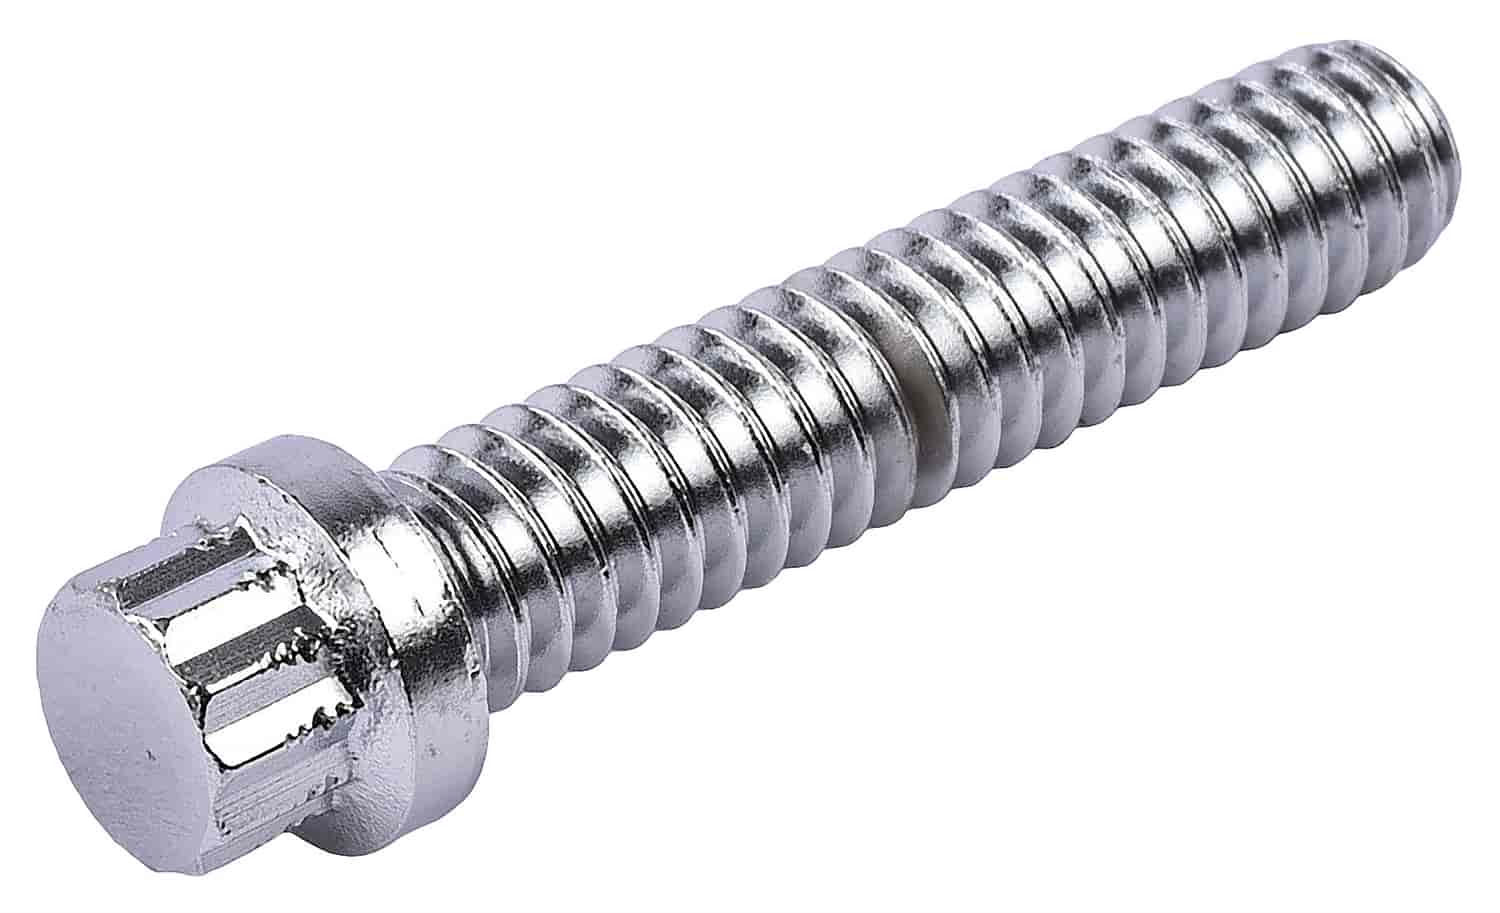 12-Point Fastener [1/4 in. -20 Thread x 1 1/4 (.250) in. Length]